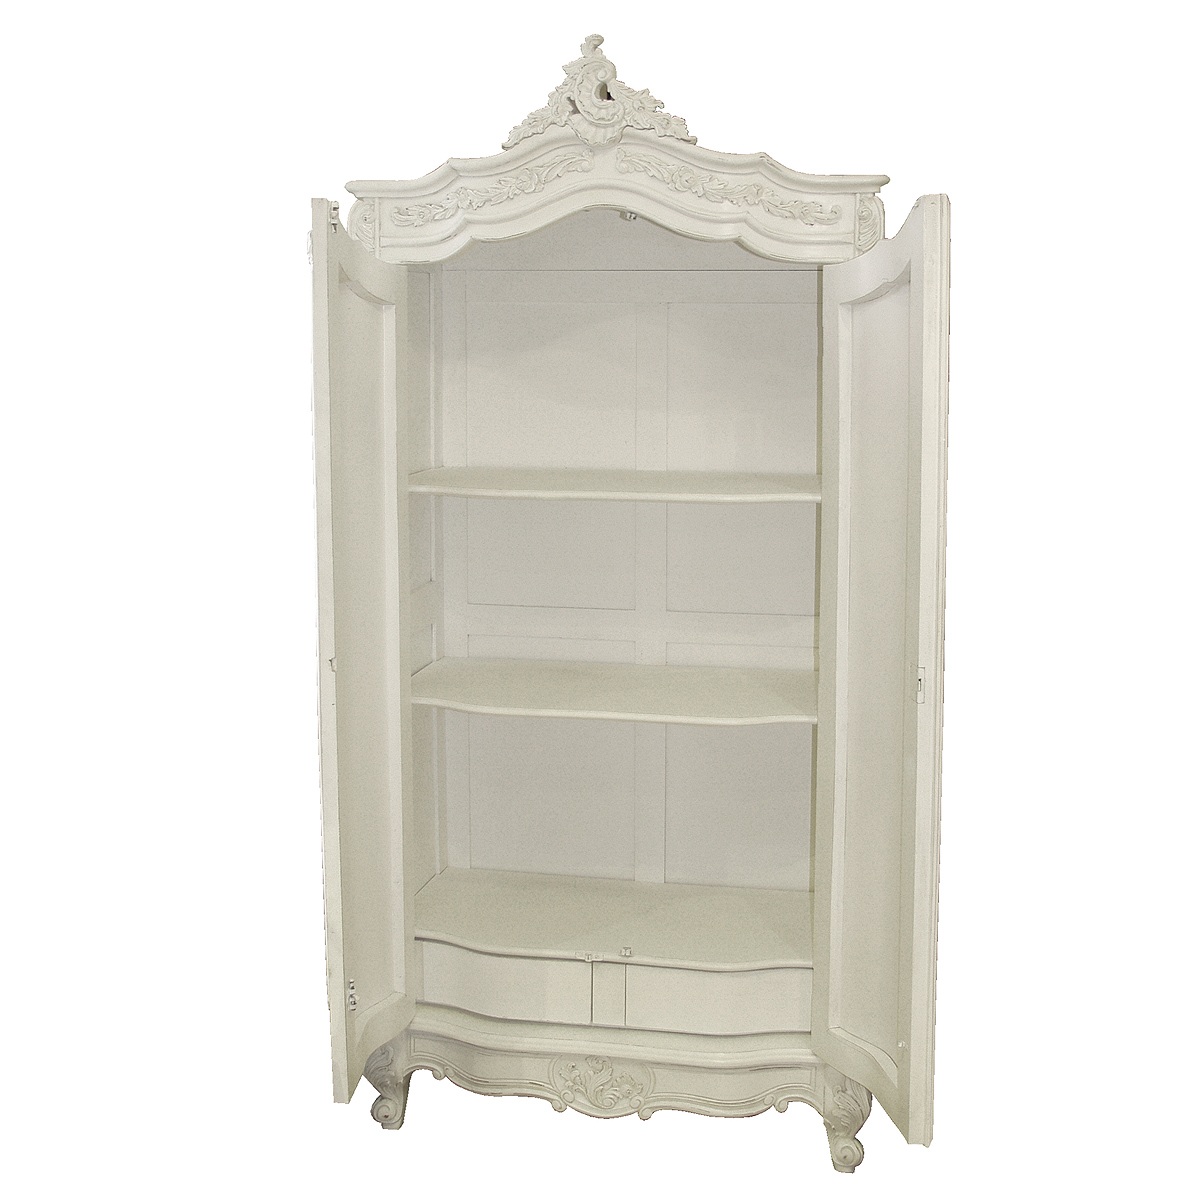 Provencal White Carved French Armoire, French Bedroom Company